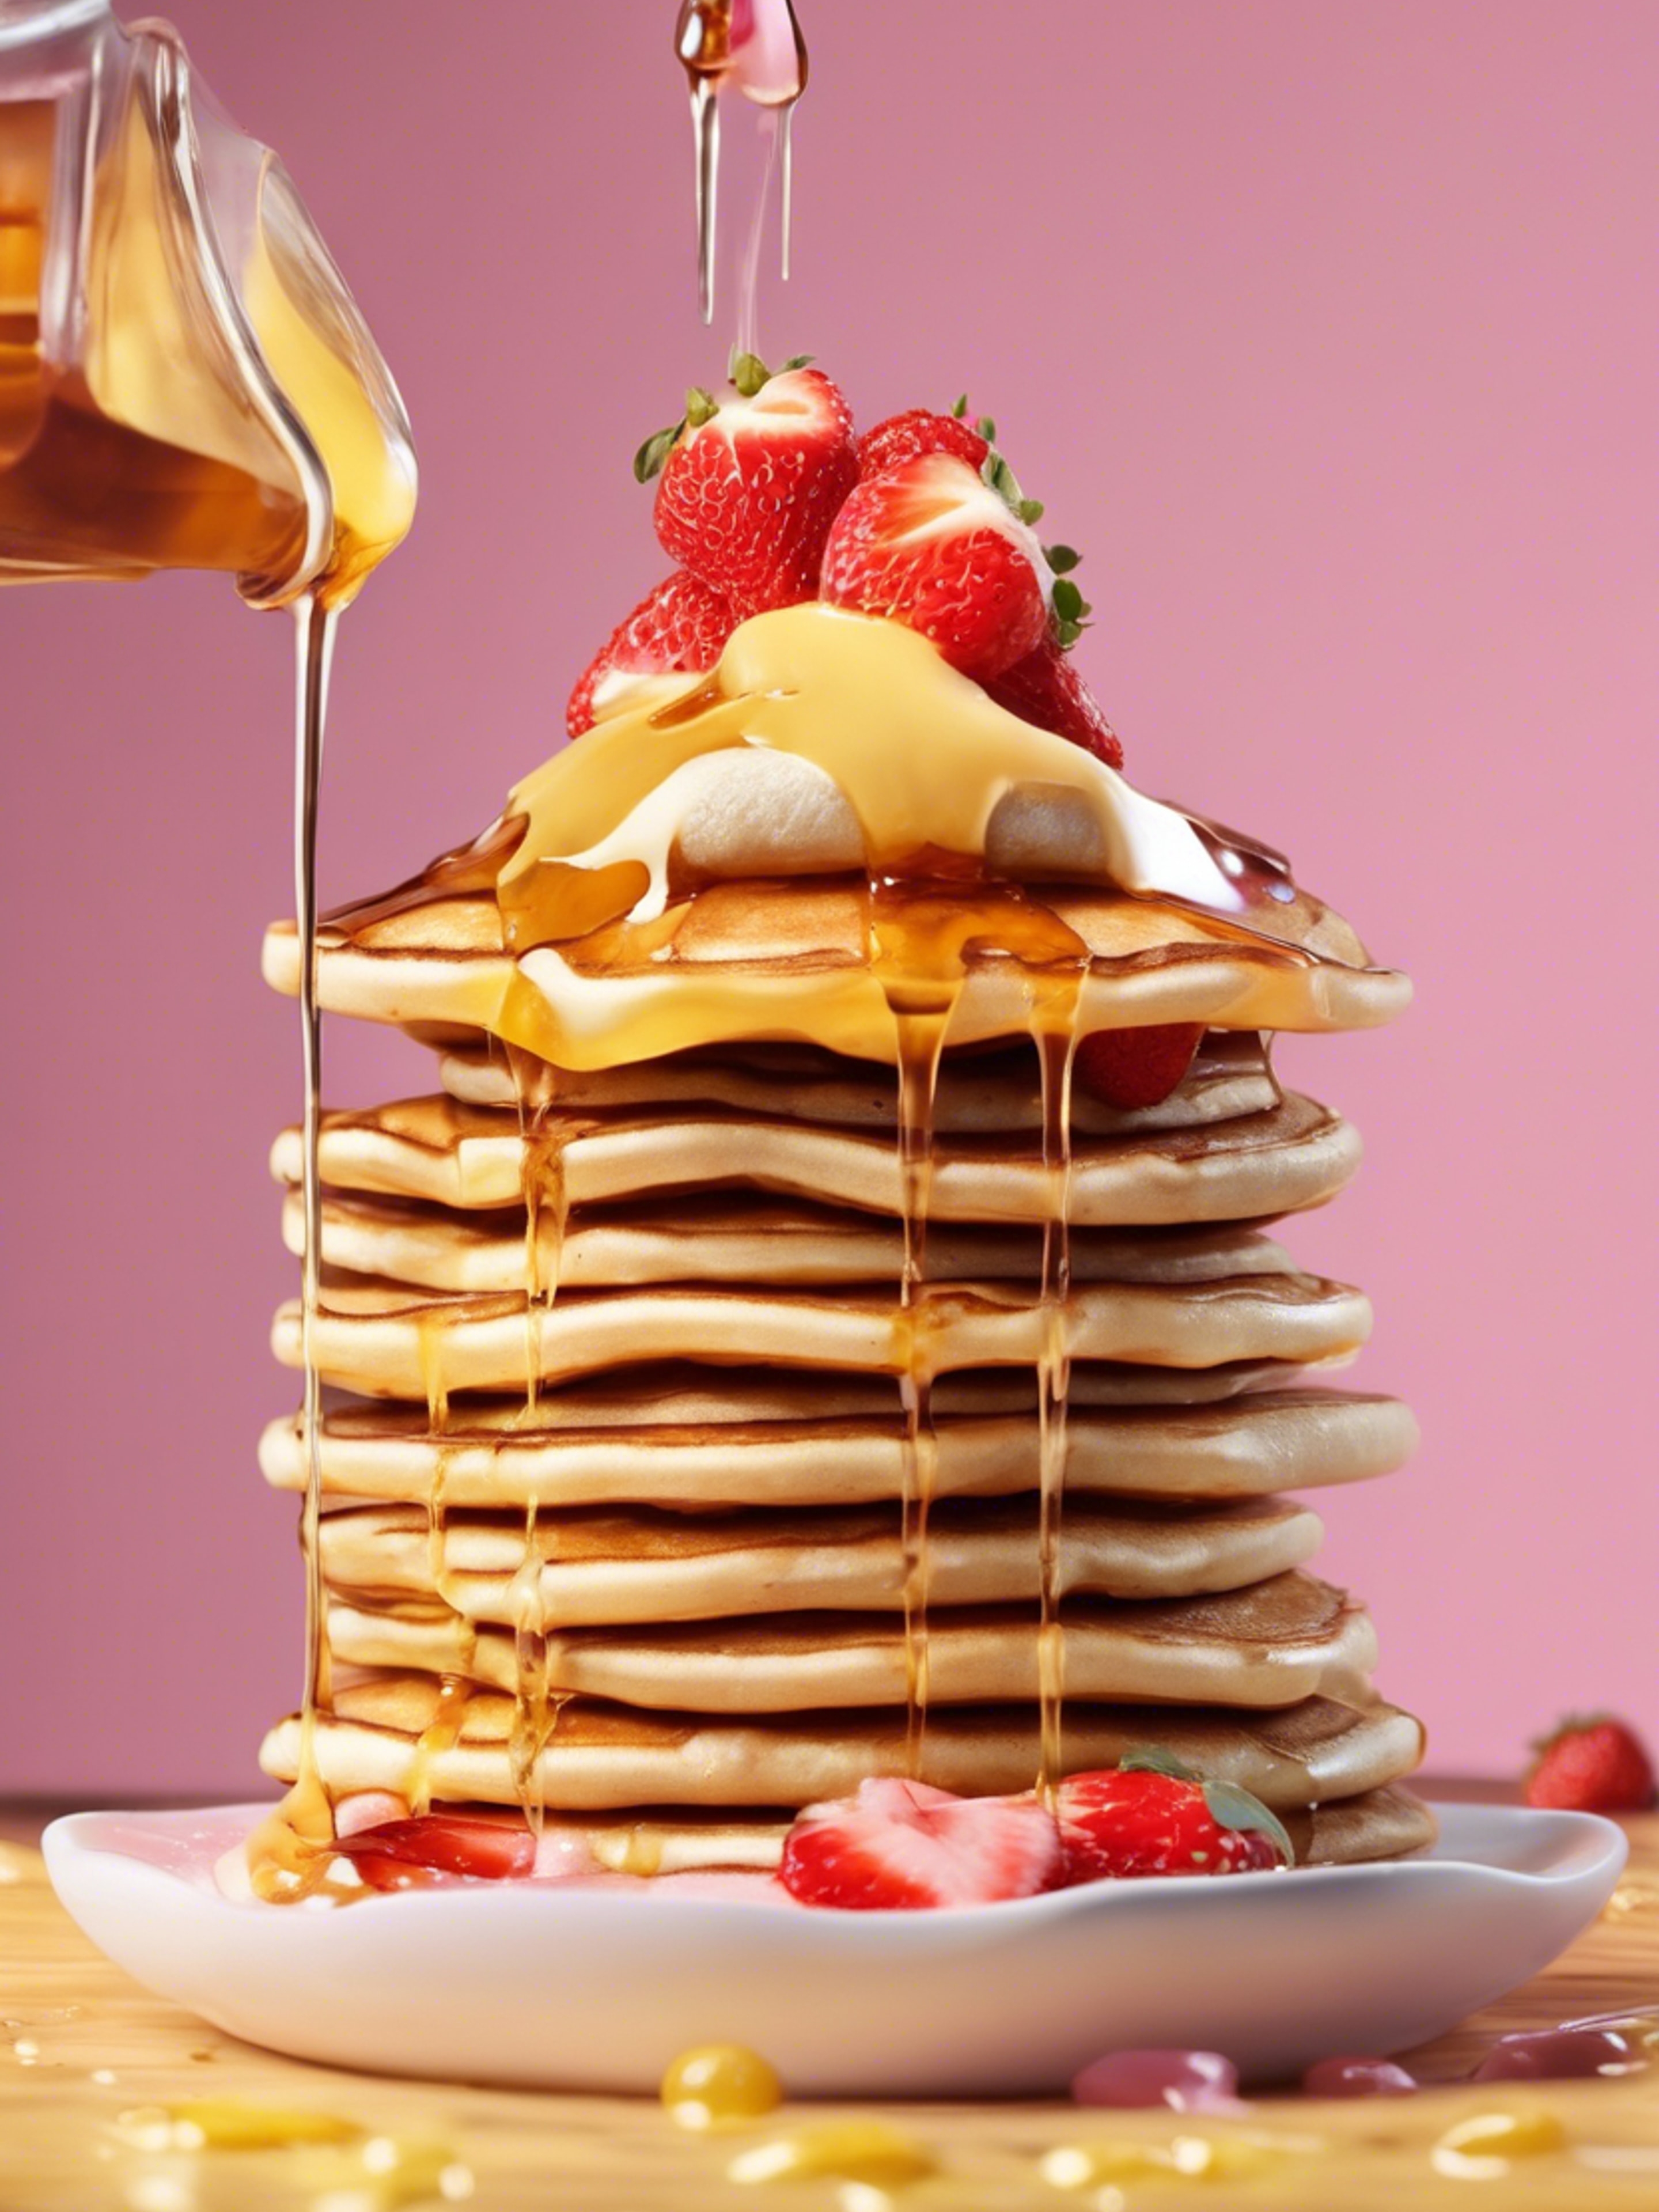 Beige kawaii pancakes stacked with a melted butter and syrup, topped with mini strawberry slices. Hintergrund[6cf29e03a904430684e0]